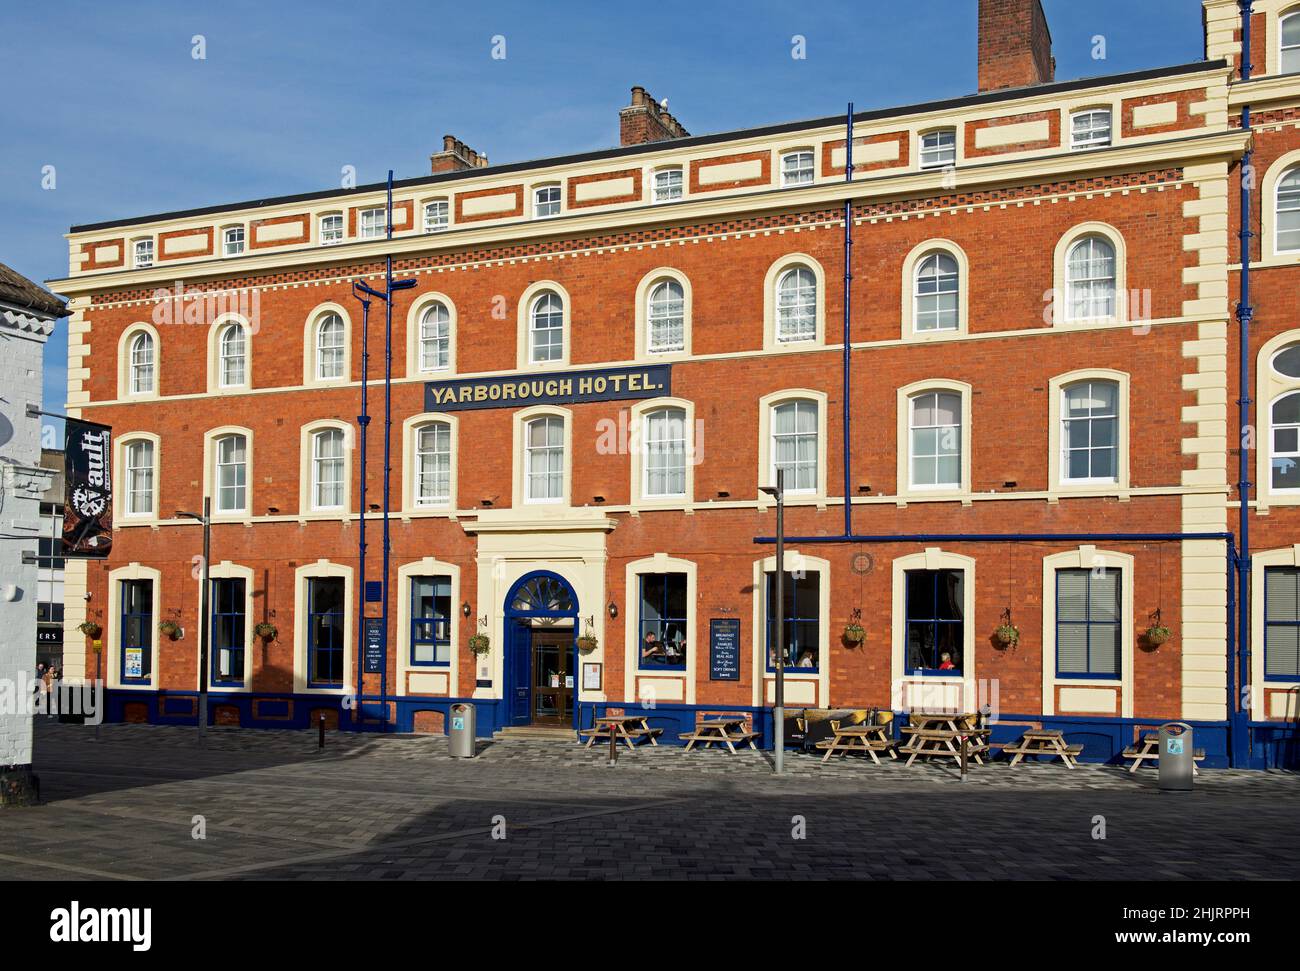 The Yarborough Hotel, a Wetherspoon pub in Grimsby, Lincolnshire, England UK Stock Photo